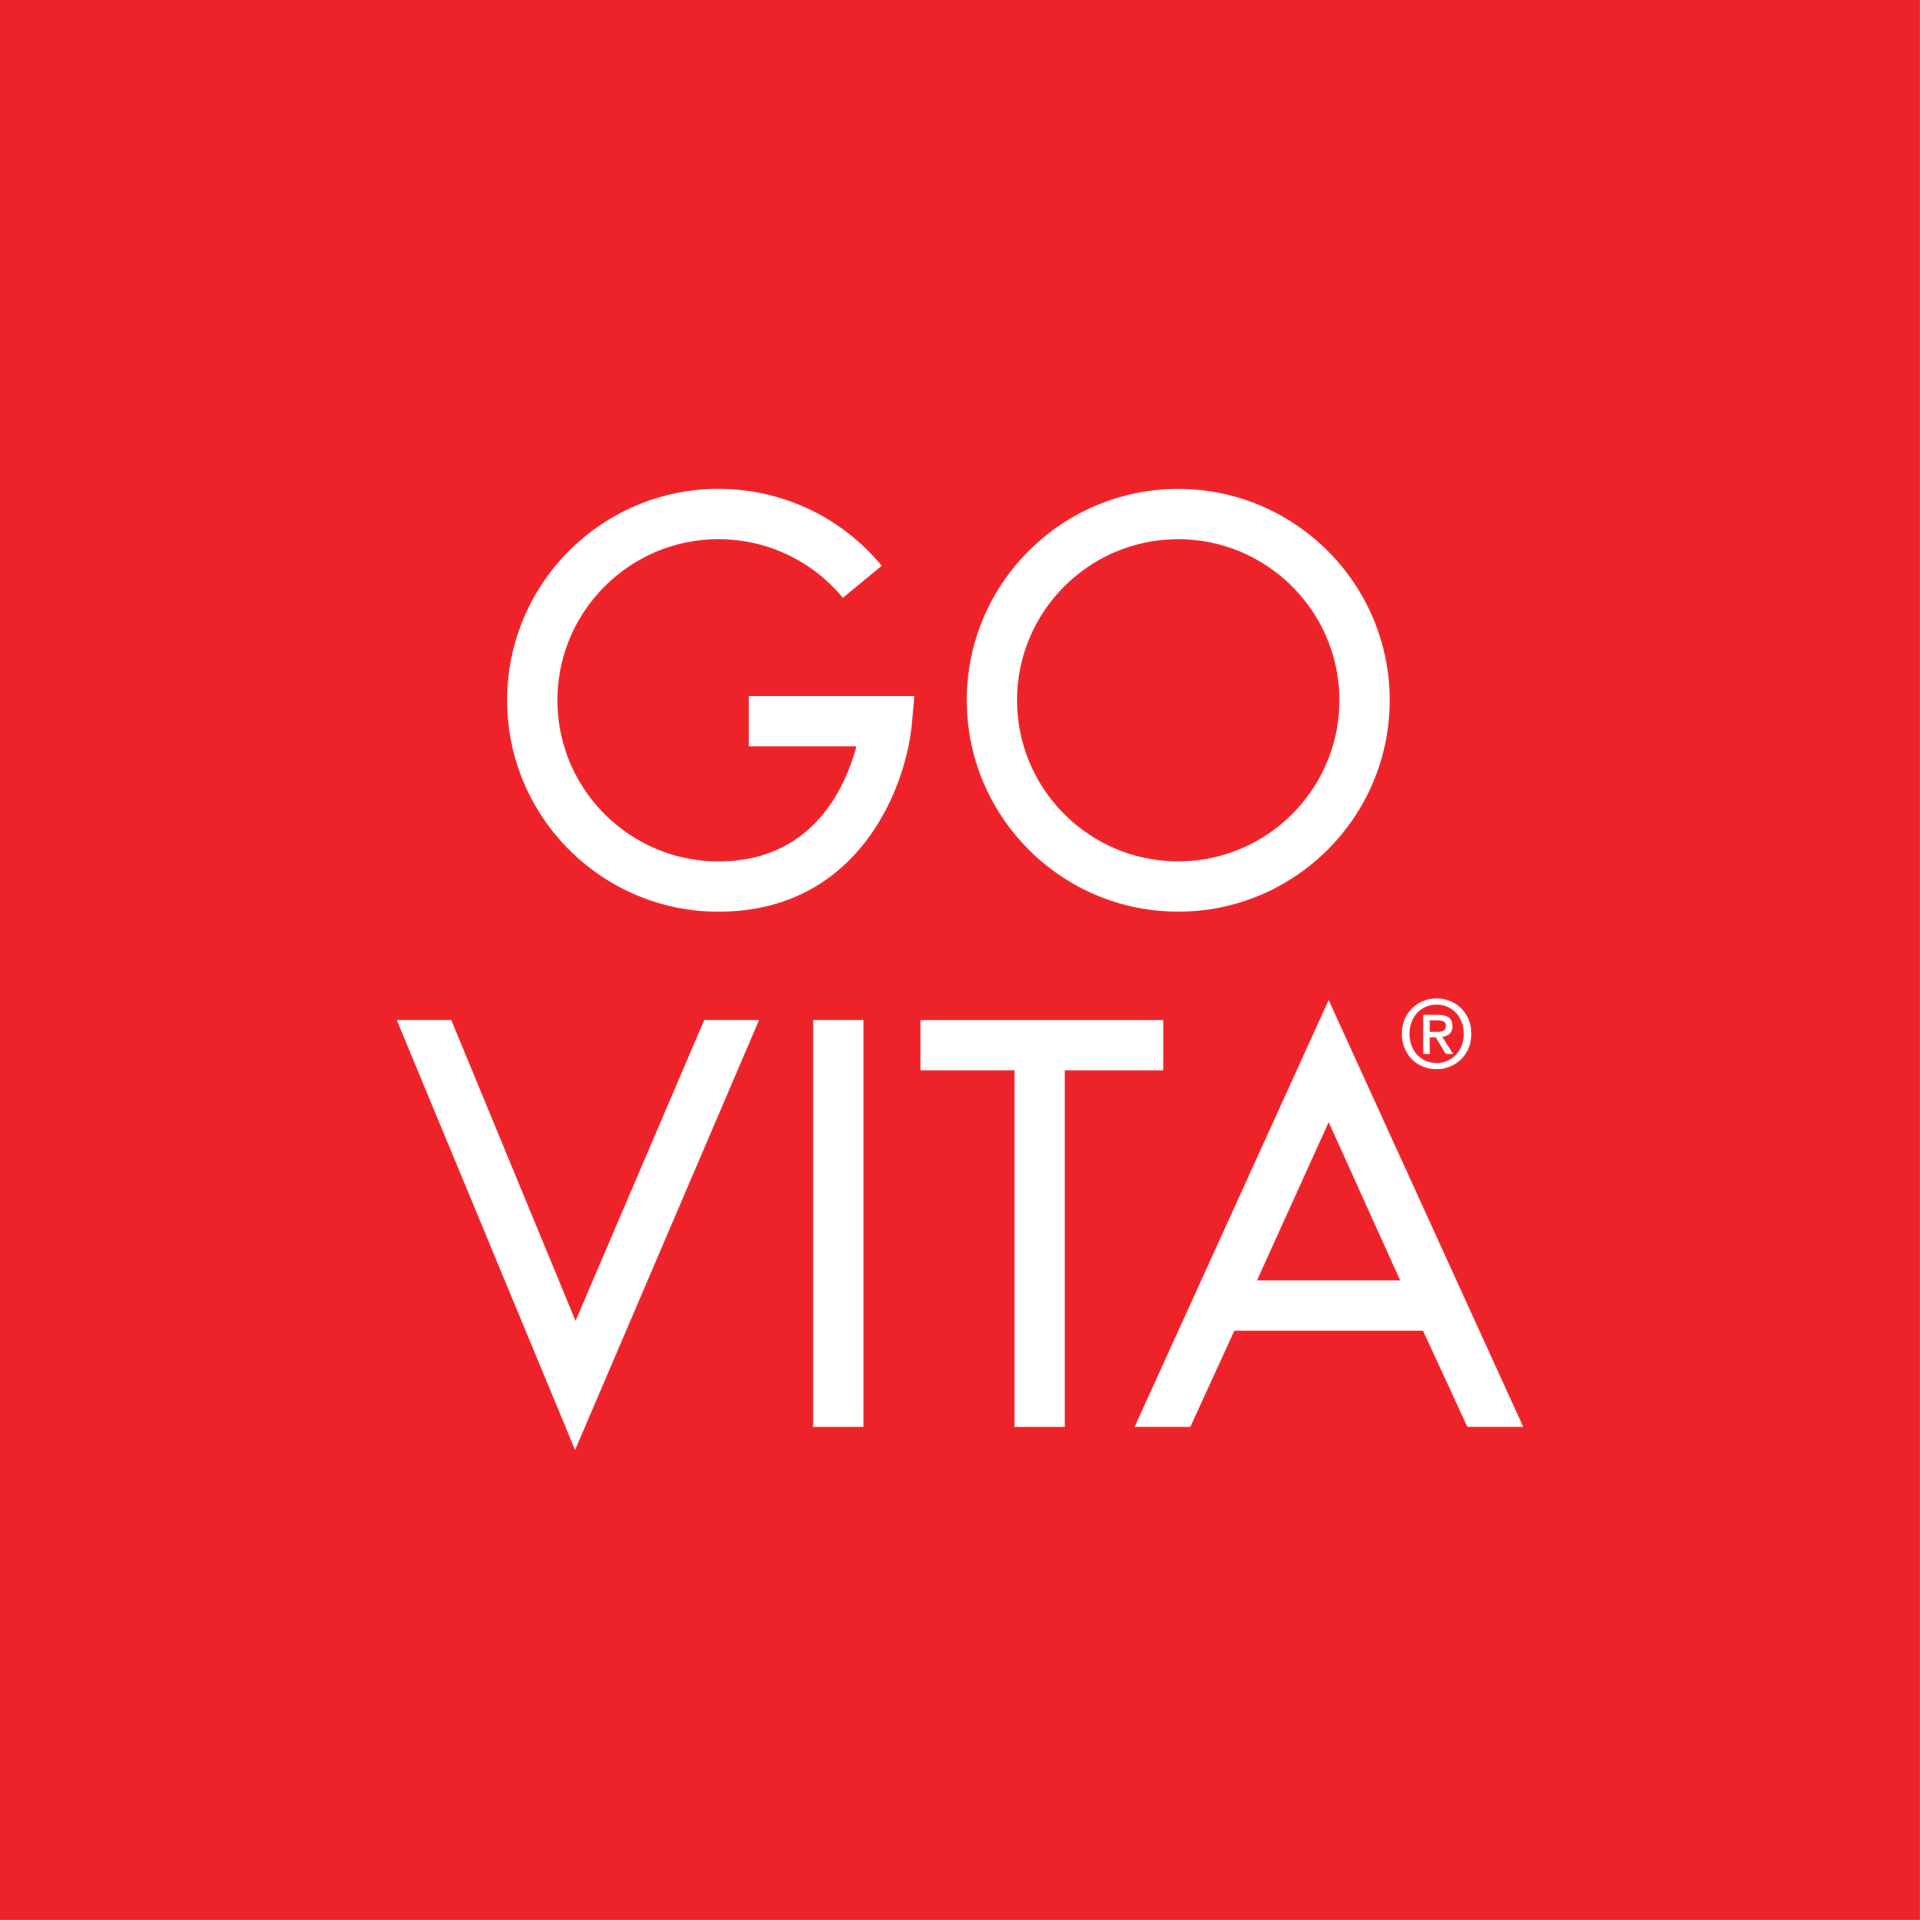 Find Supplements & Organic Produce at Go Vita Health Foods